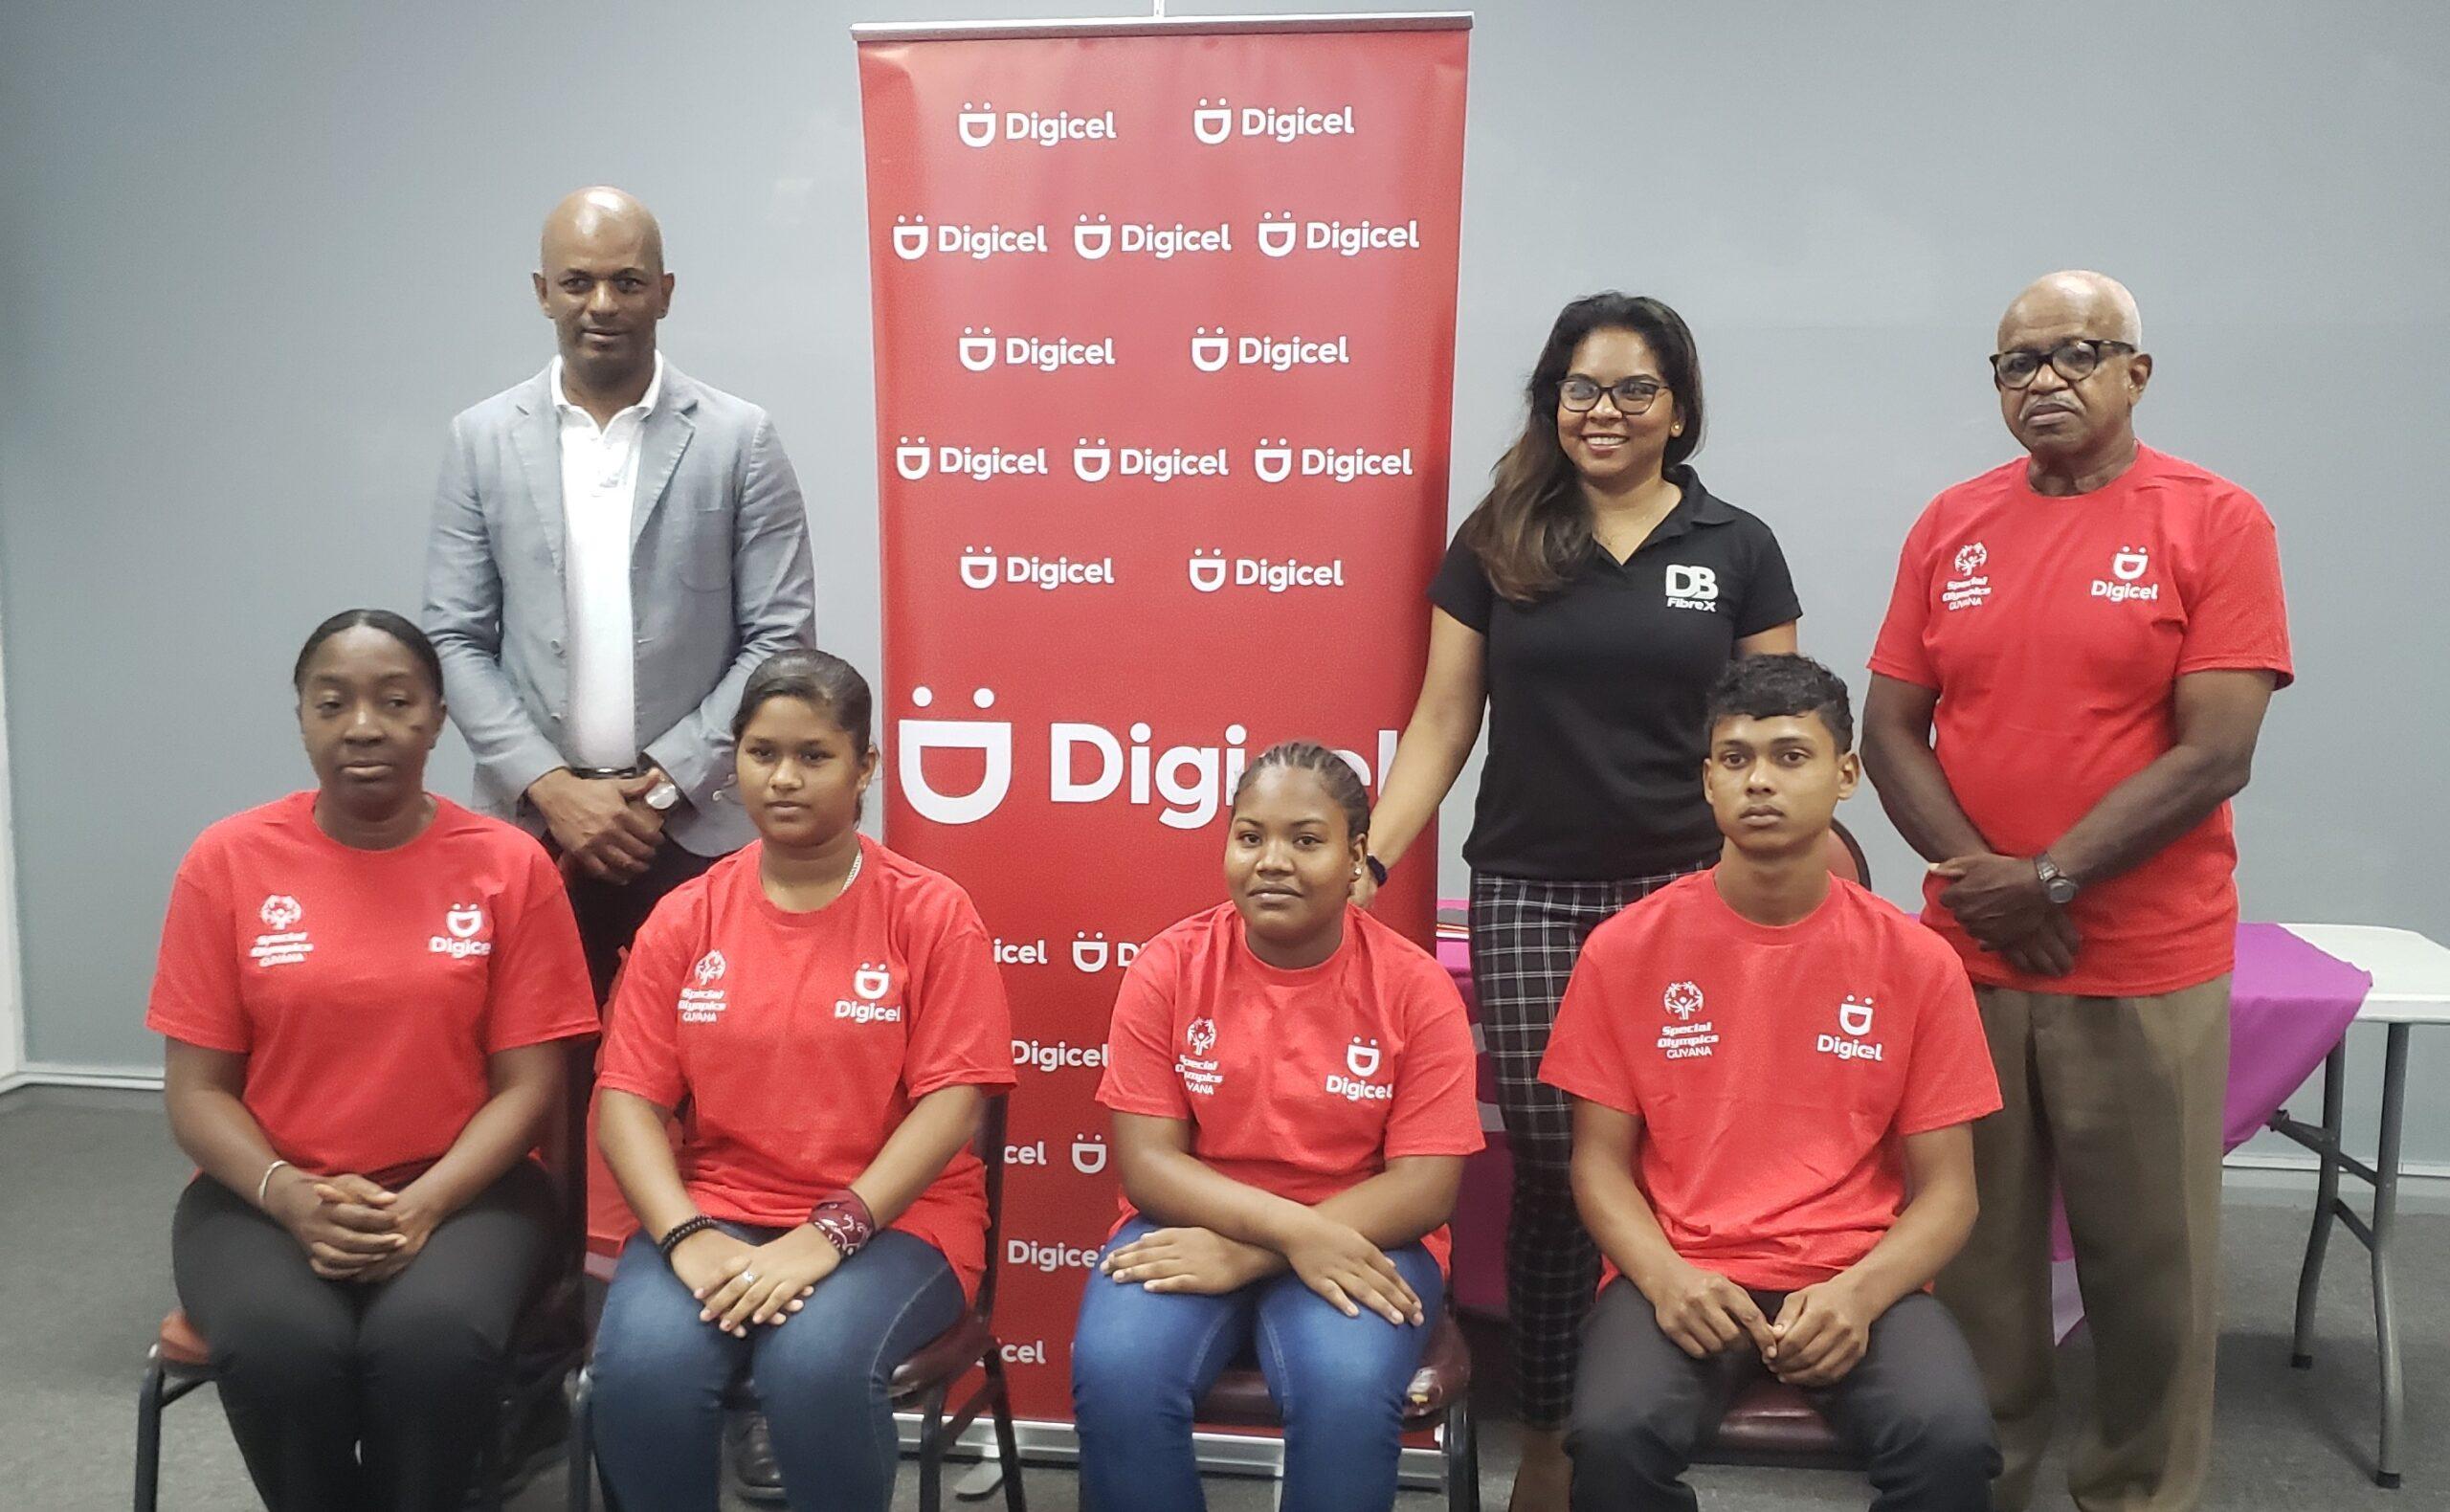 GOA president, Godfrey Munroe, Digicel Guyana Communications Manager, Vidya Sanichara and Wilton Spencer, President of Special Olympics Guyana along with some athletes and coach.